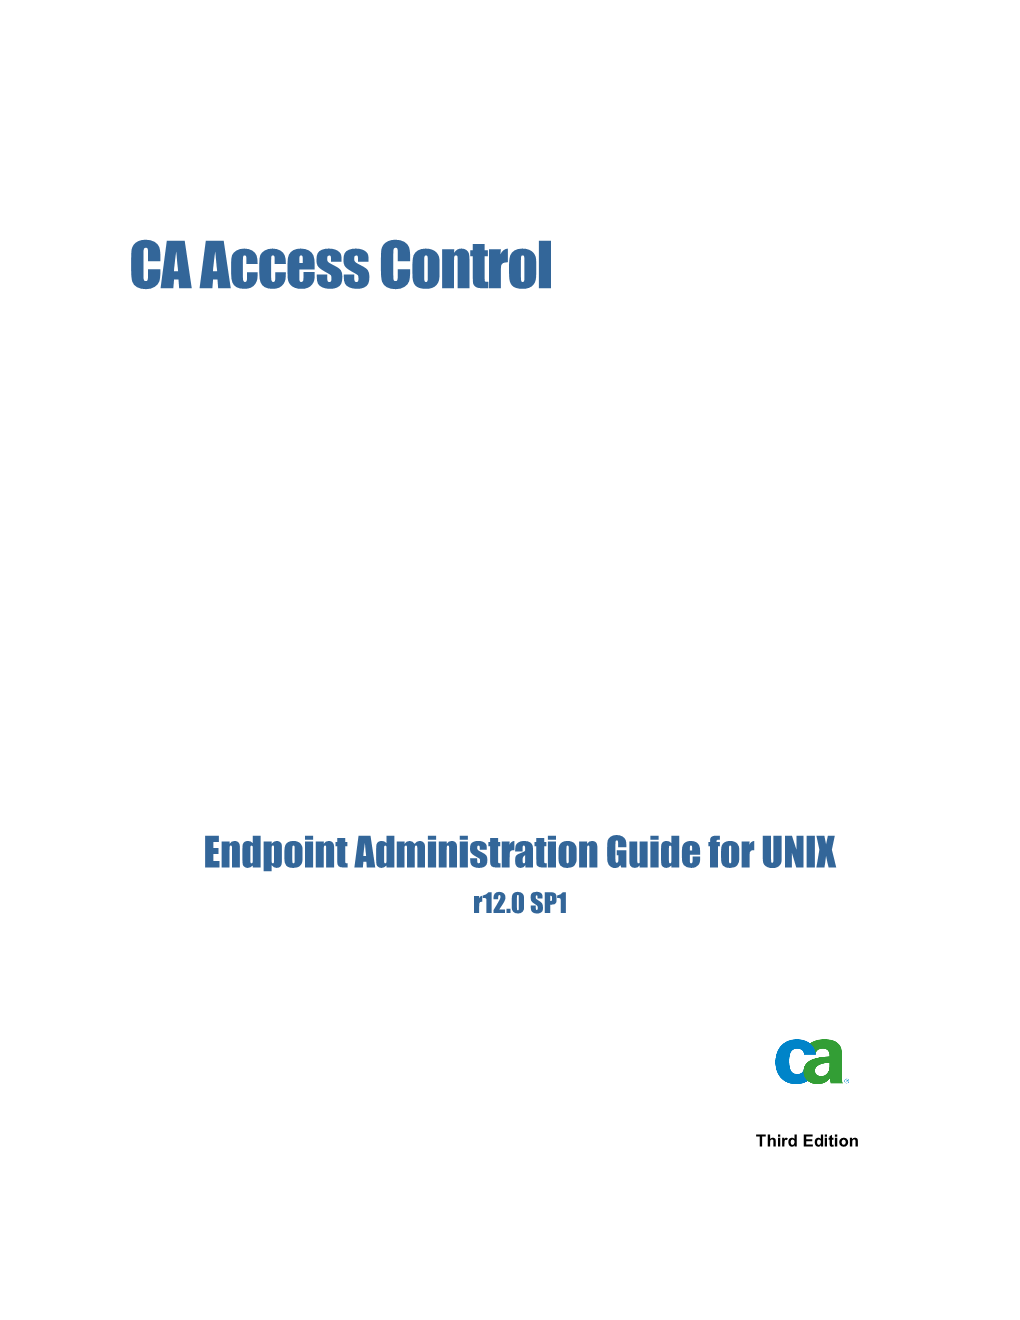 CA Access Control Endpoint Administration Guide for UNIX